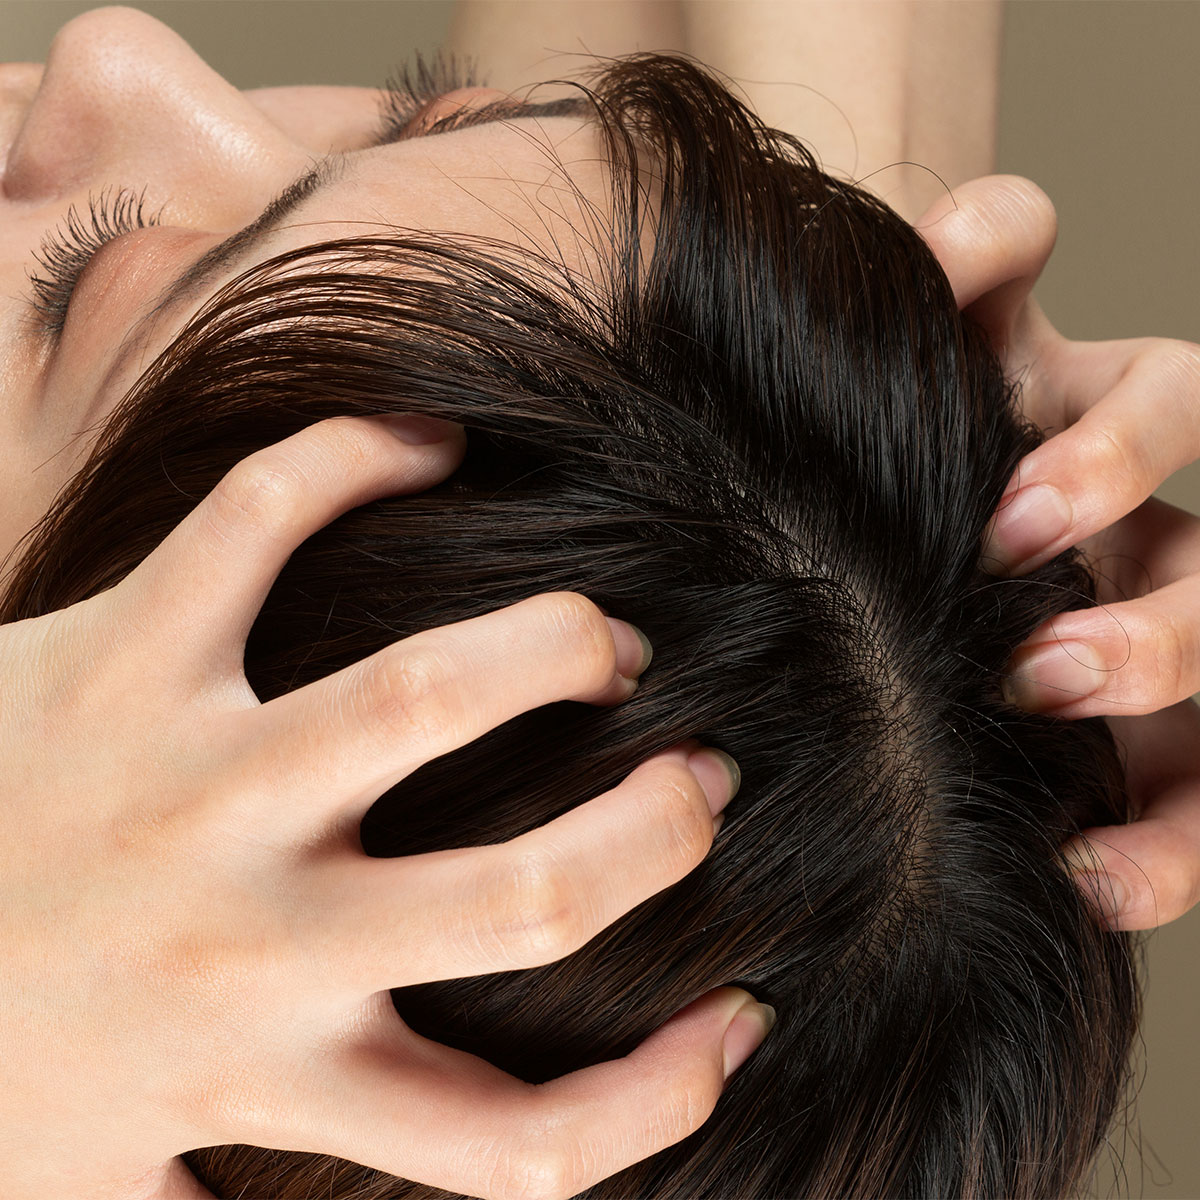 woman massaging scalp with hands nails scratching brown hair